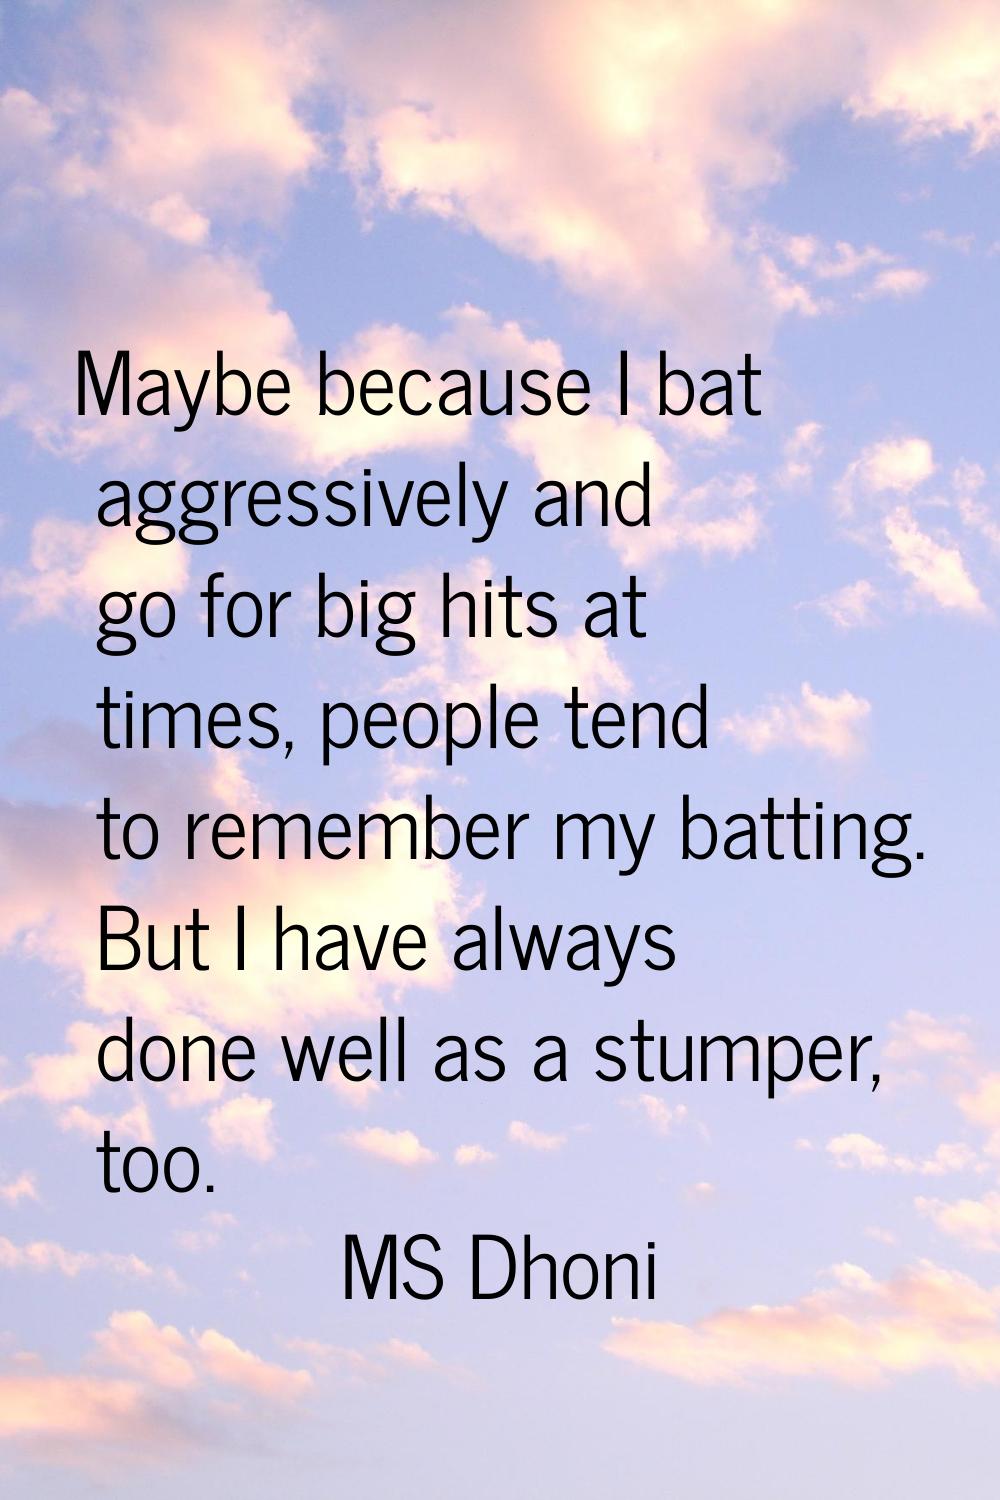 Maybe because I bat aggressively and go for big hits at times, people tend to remember my batting. 